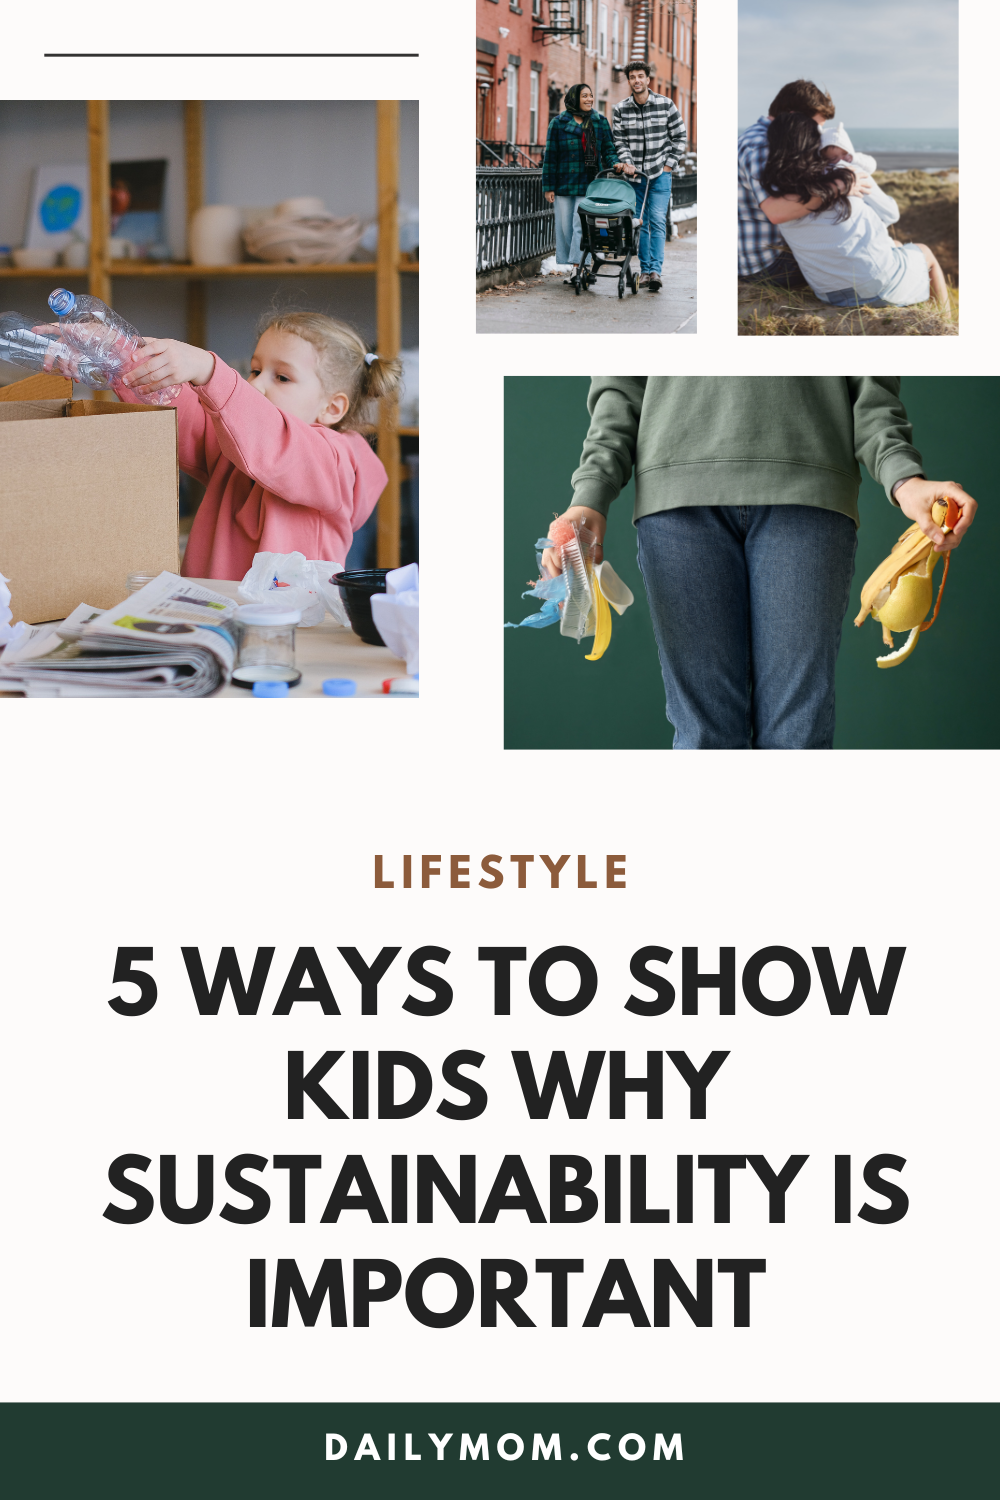 5 Ways To Show Kids Why Sustainability Is Important